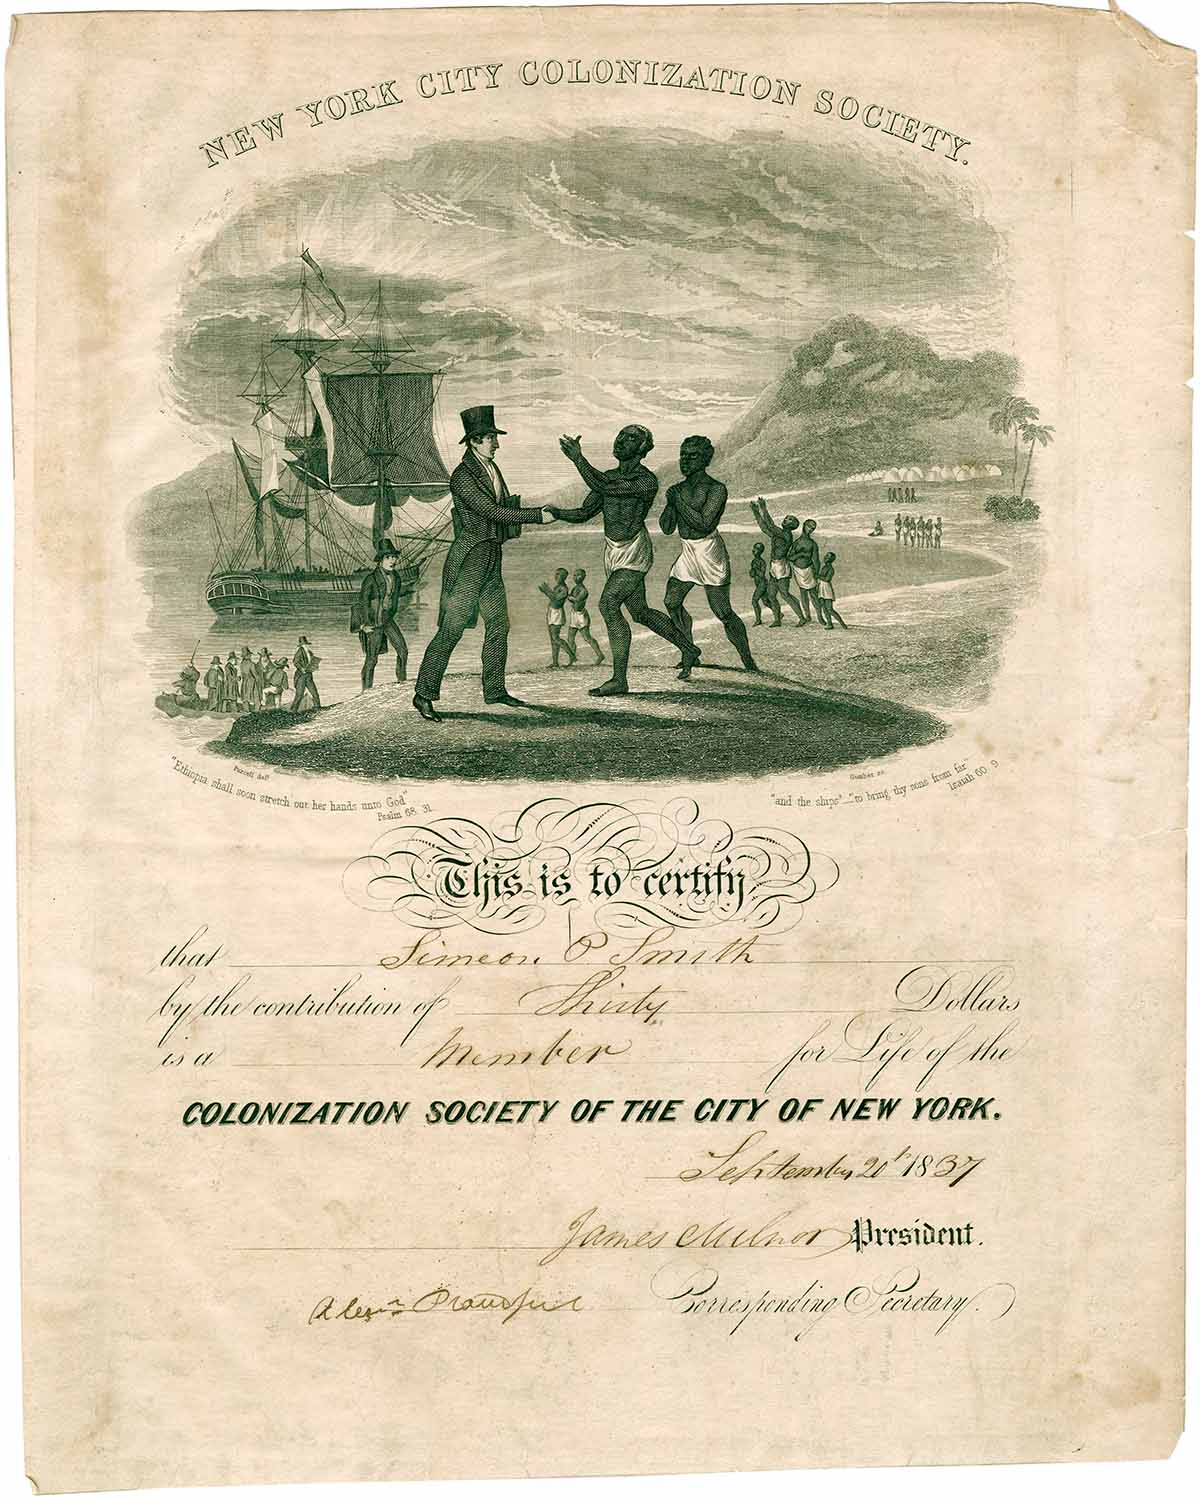 Simeon P. Smith’s certificate of membership to the Colonization Society of the City of New York, 20 September 1837 © New York Historical Society/Getty Images.